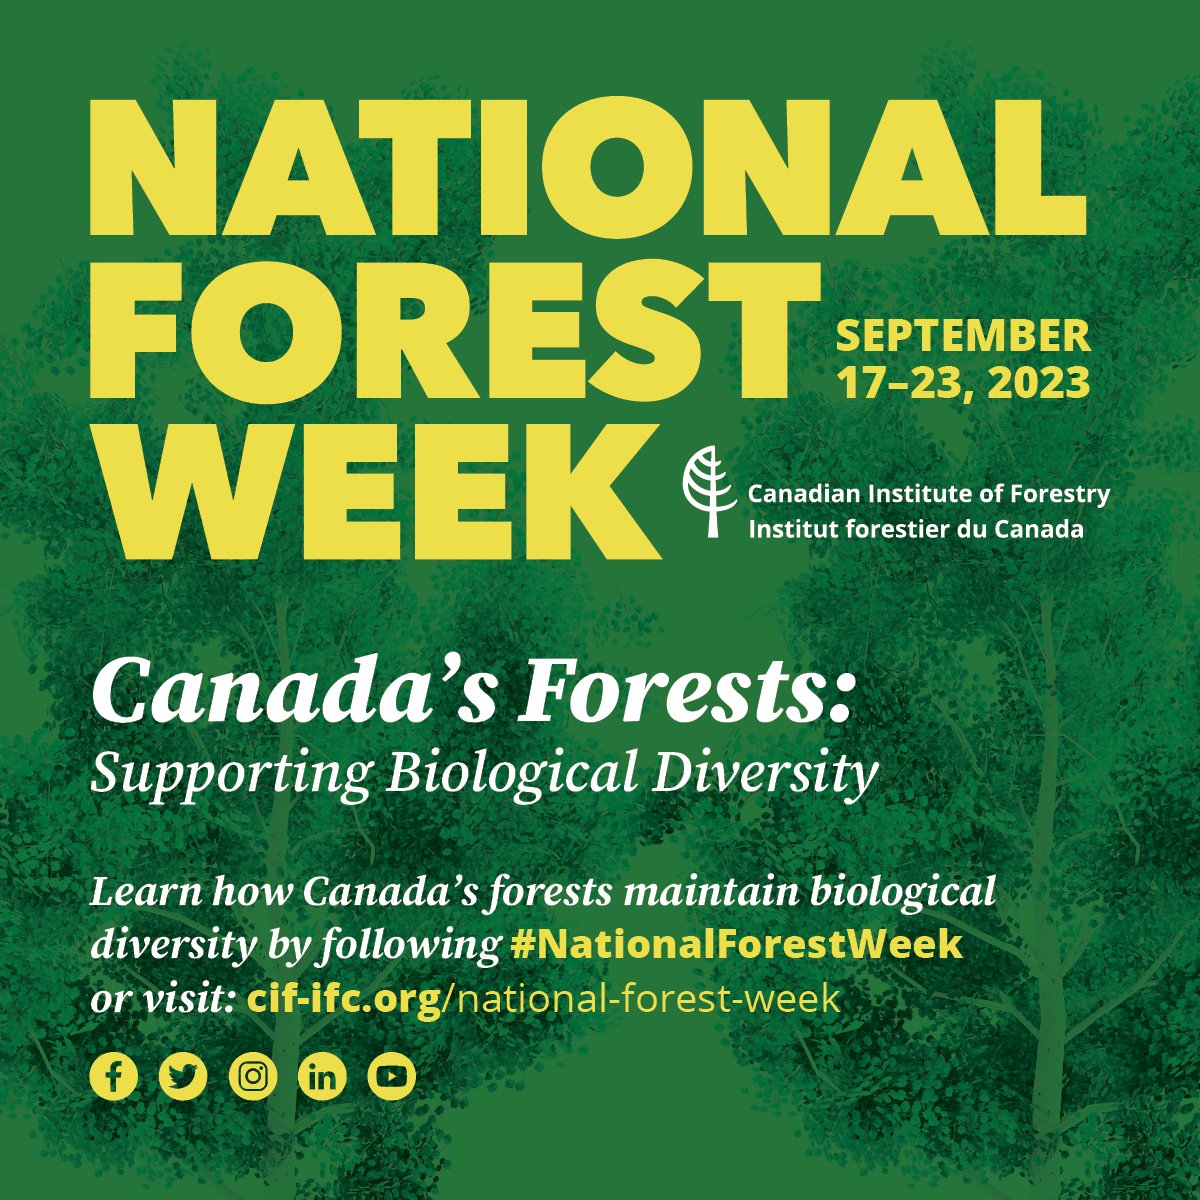 Happy National Forest Week! This years National Forest Week theme is Canada’s Forests; Supporting Biological Diversity. Stay tuned with your favorite forestry social media pages for more information as the week progresses. Join the conversation using #nationalforestweek